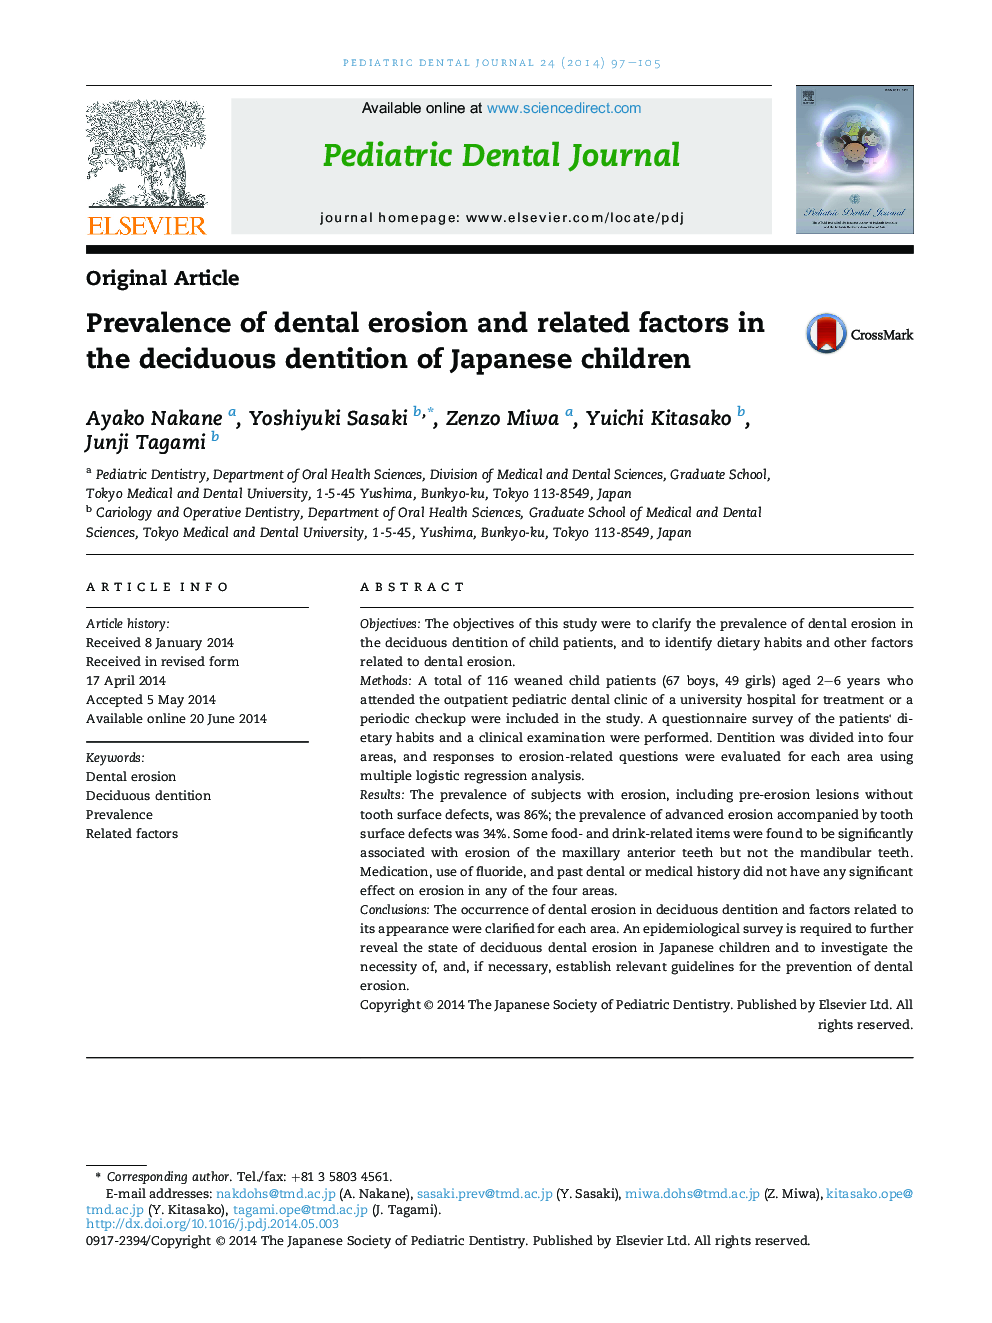 Prevalence of dental erosion and related factors in the deciduous dentition of Japanese children